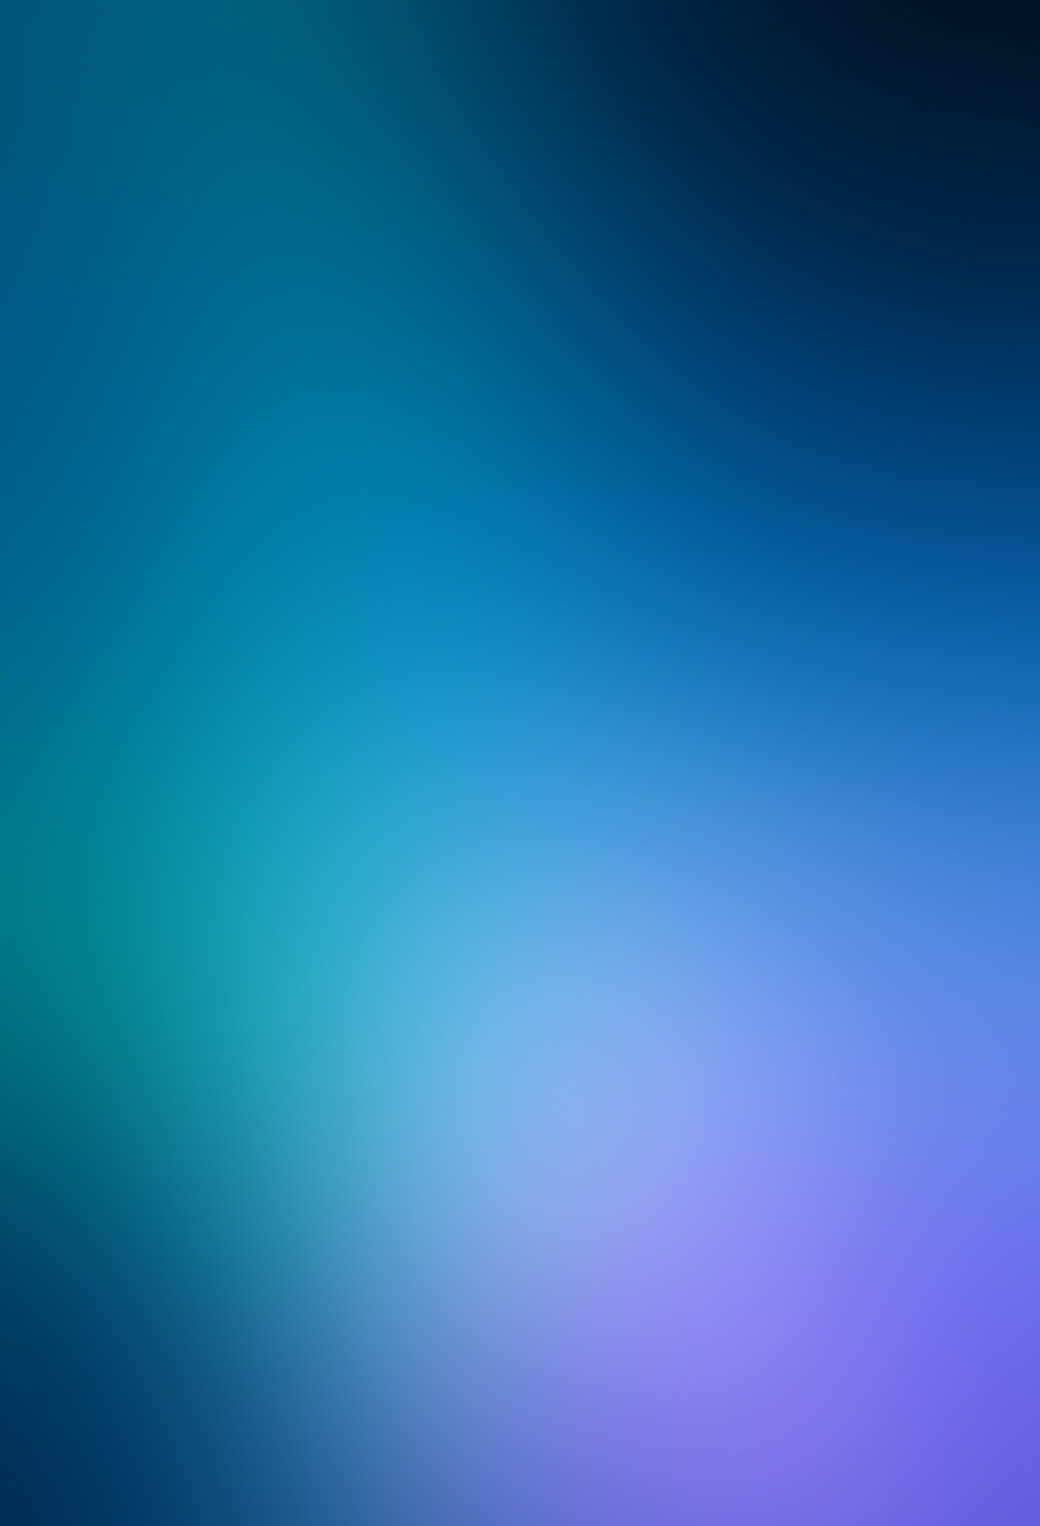 20 parallax iOS 7 wallpapers for iPhone ready to download for your